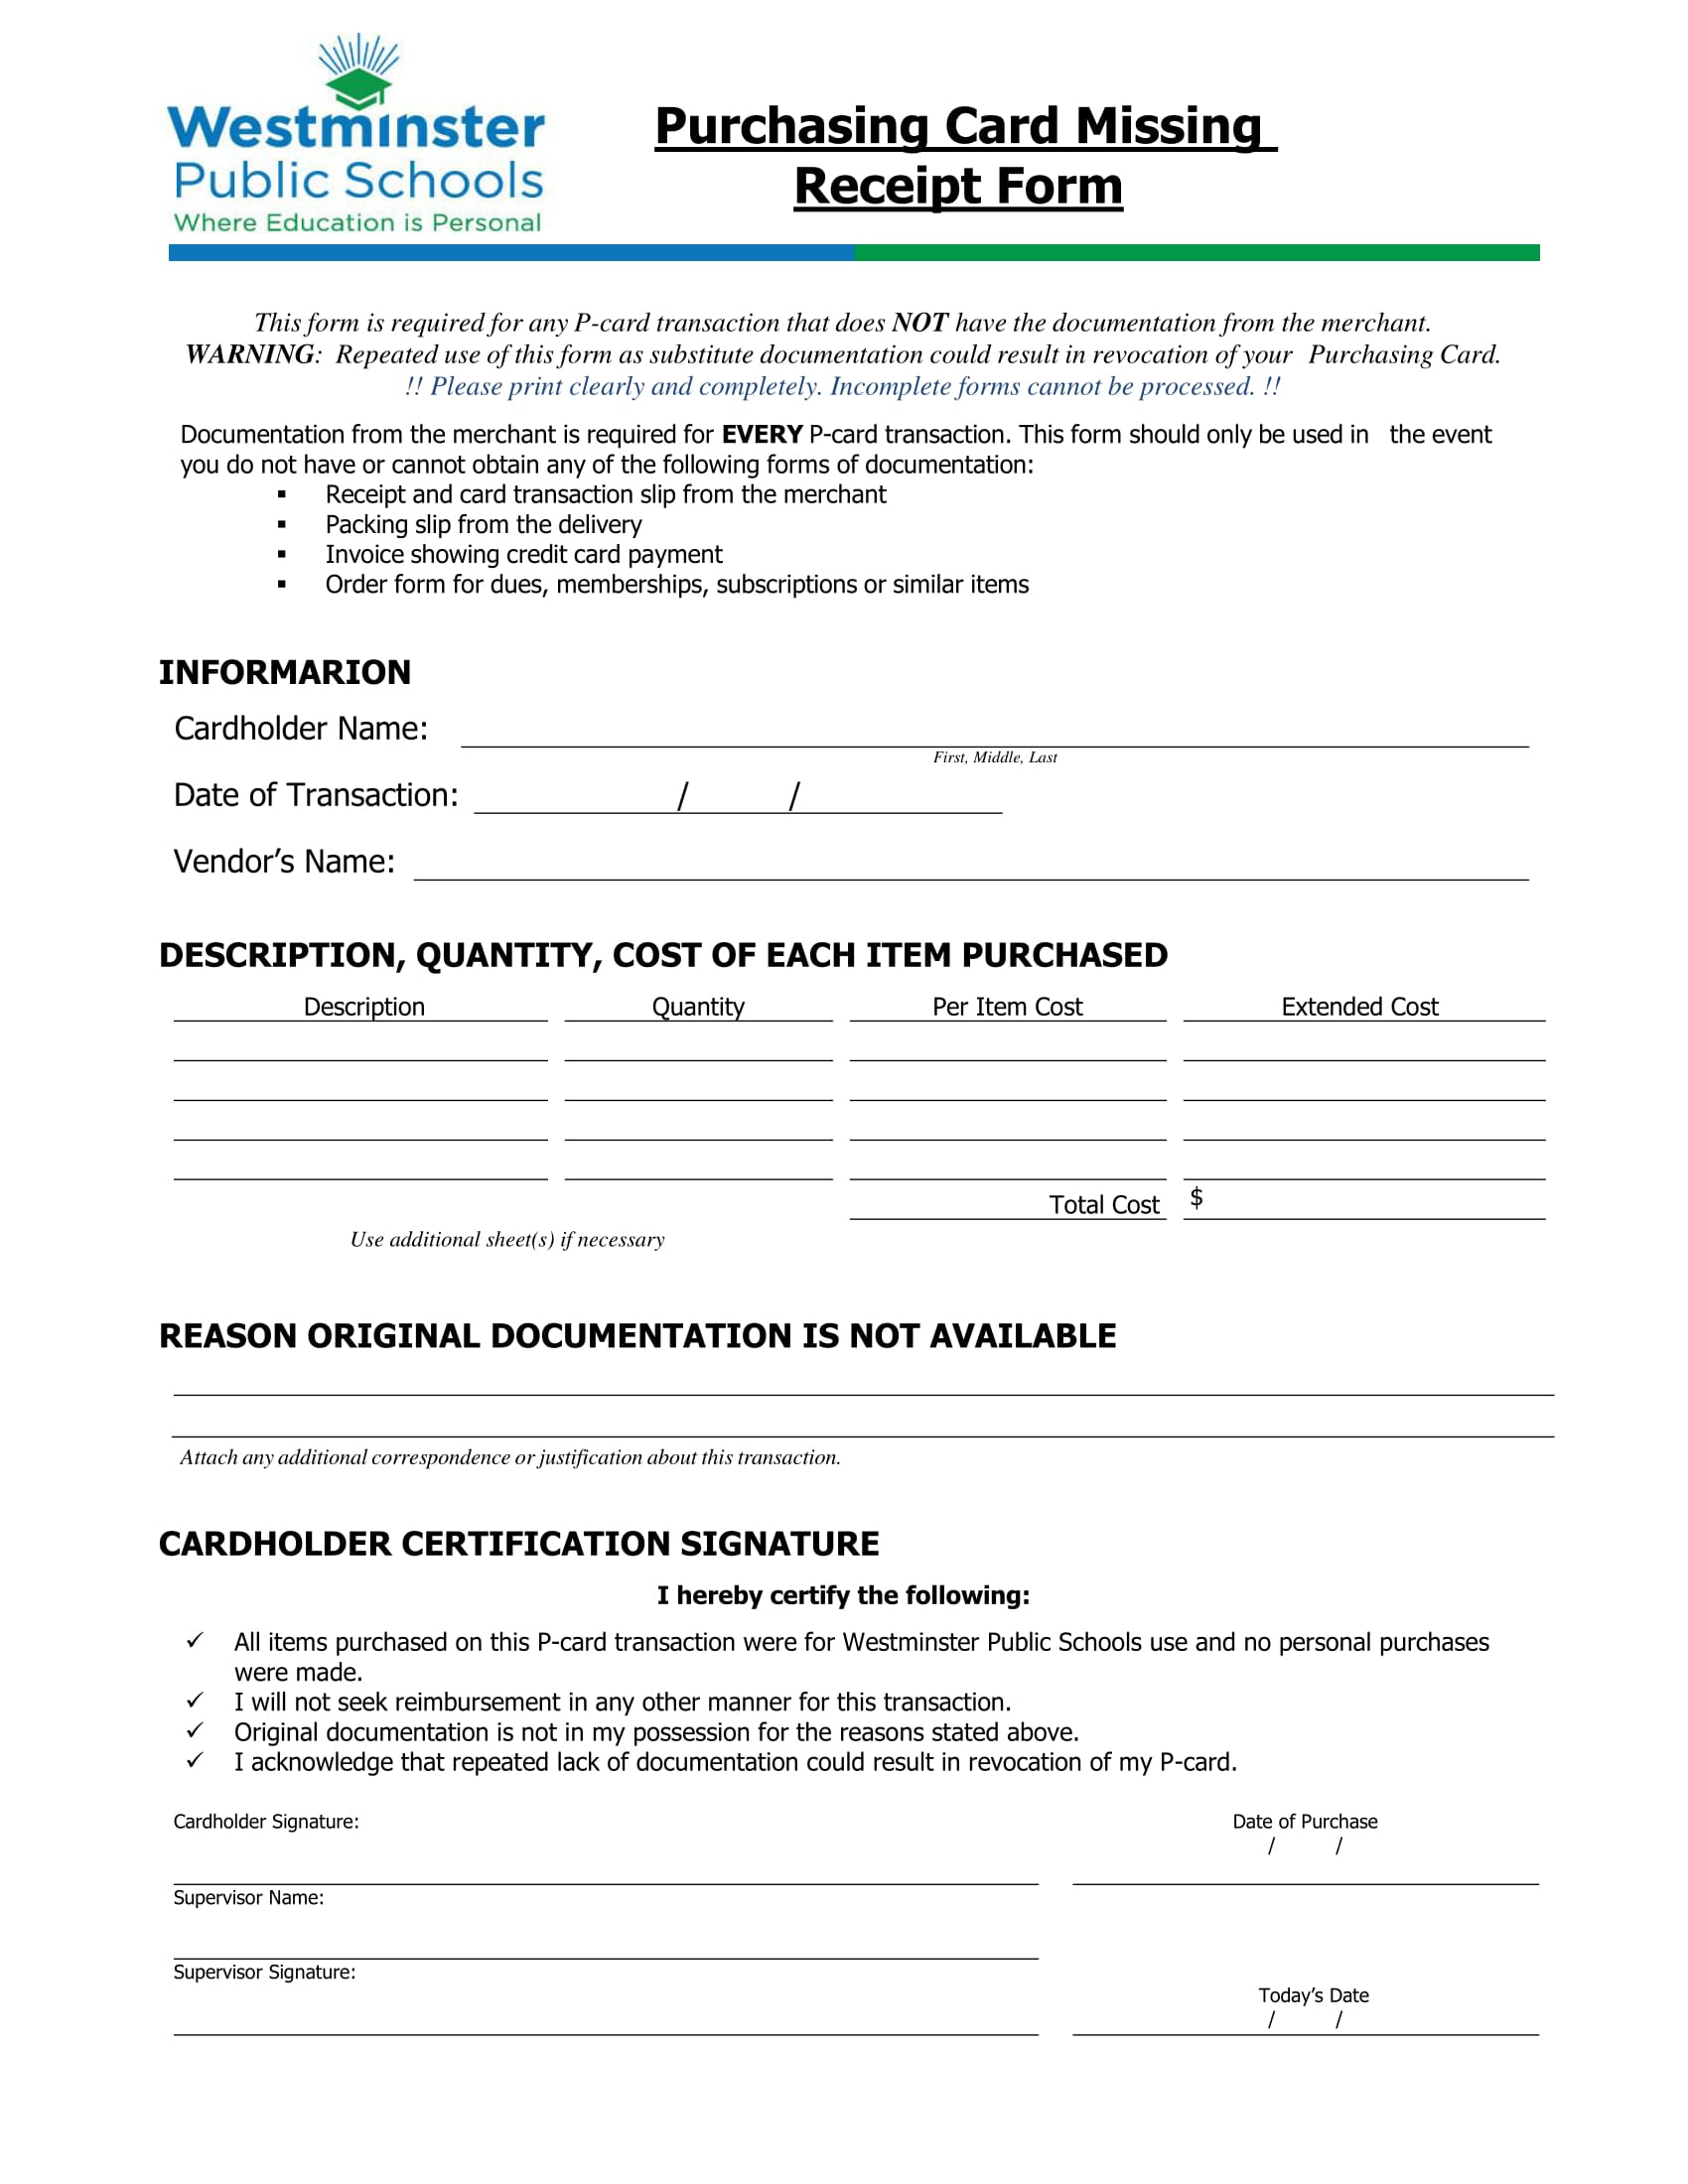 purchase receipt form 1